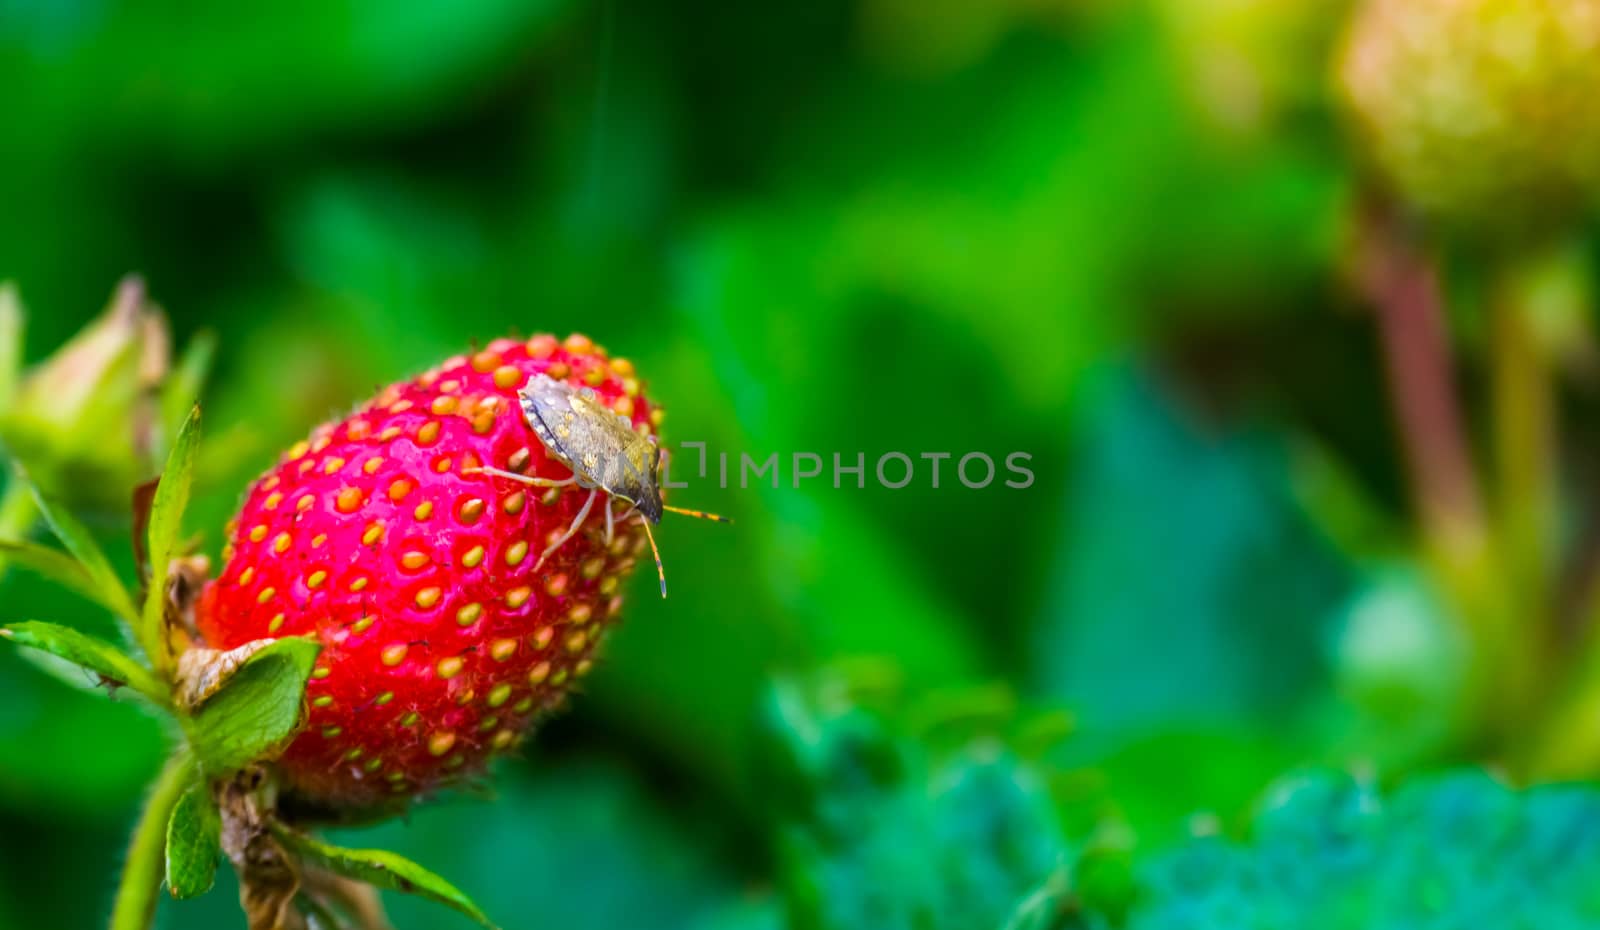 mottled shield bug sitting on a strawberry, common insect specie from Europe by charlottebleijenberg